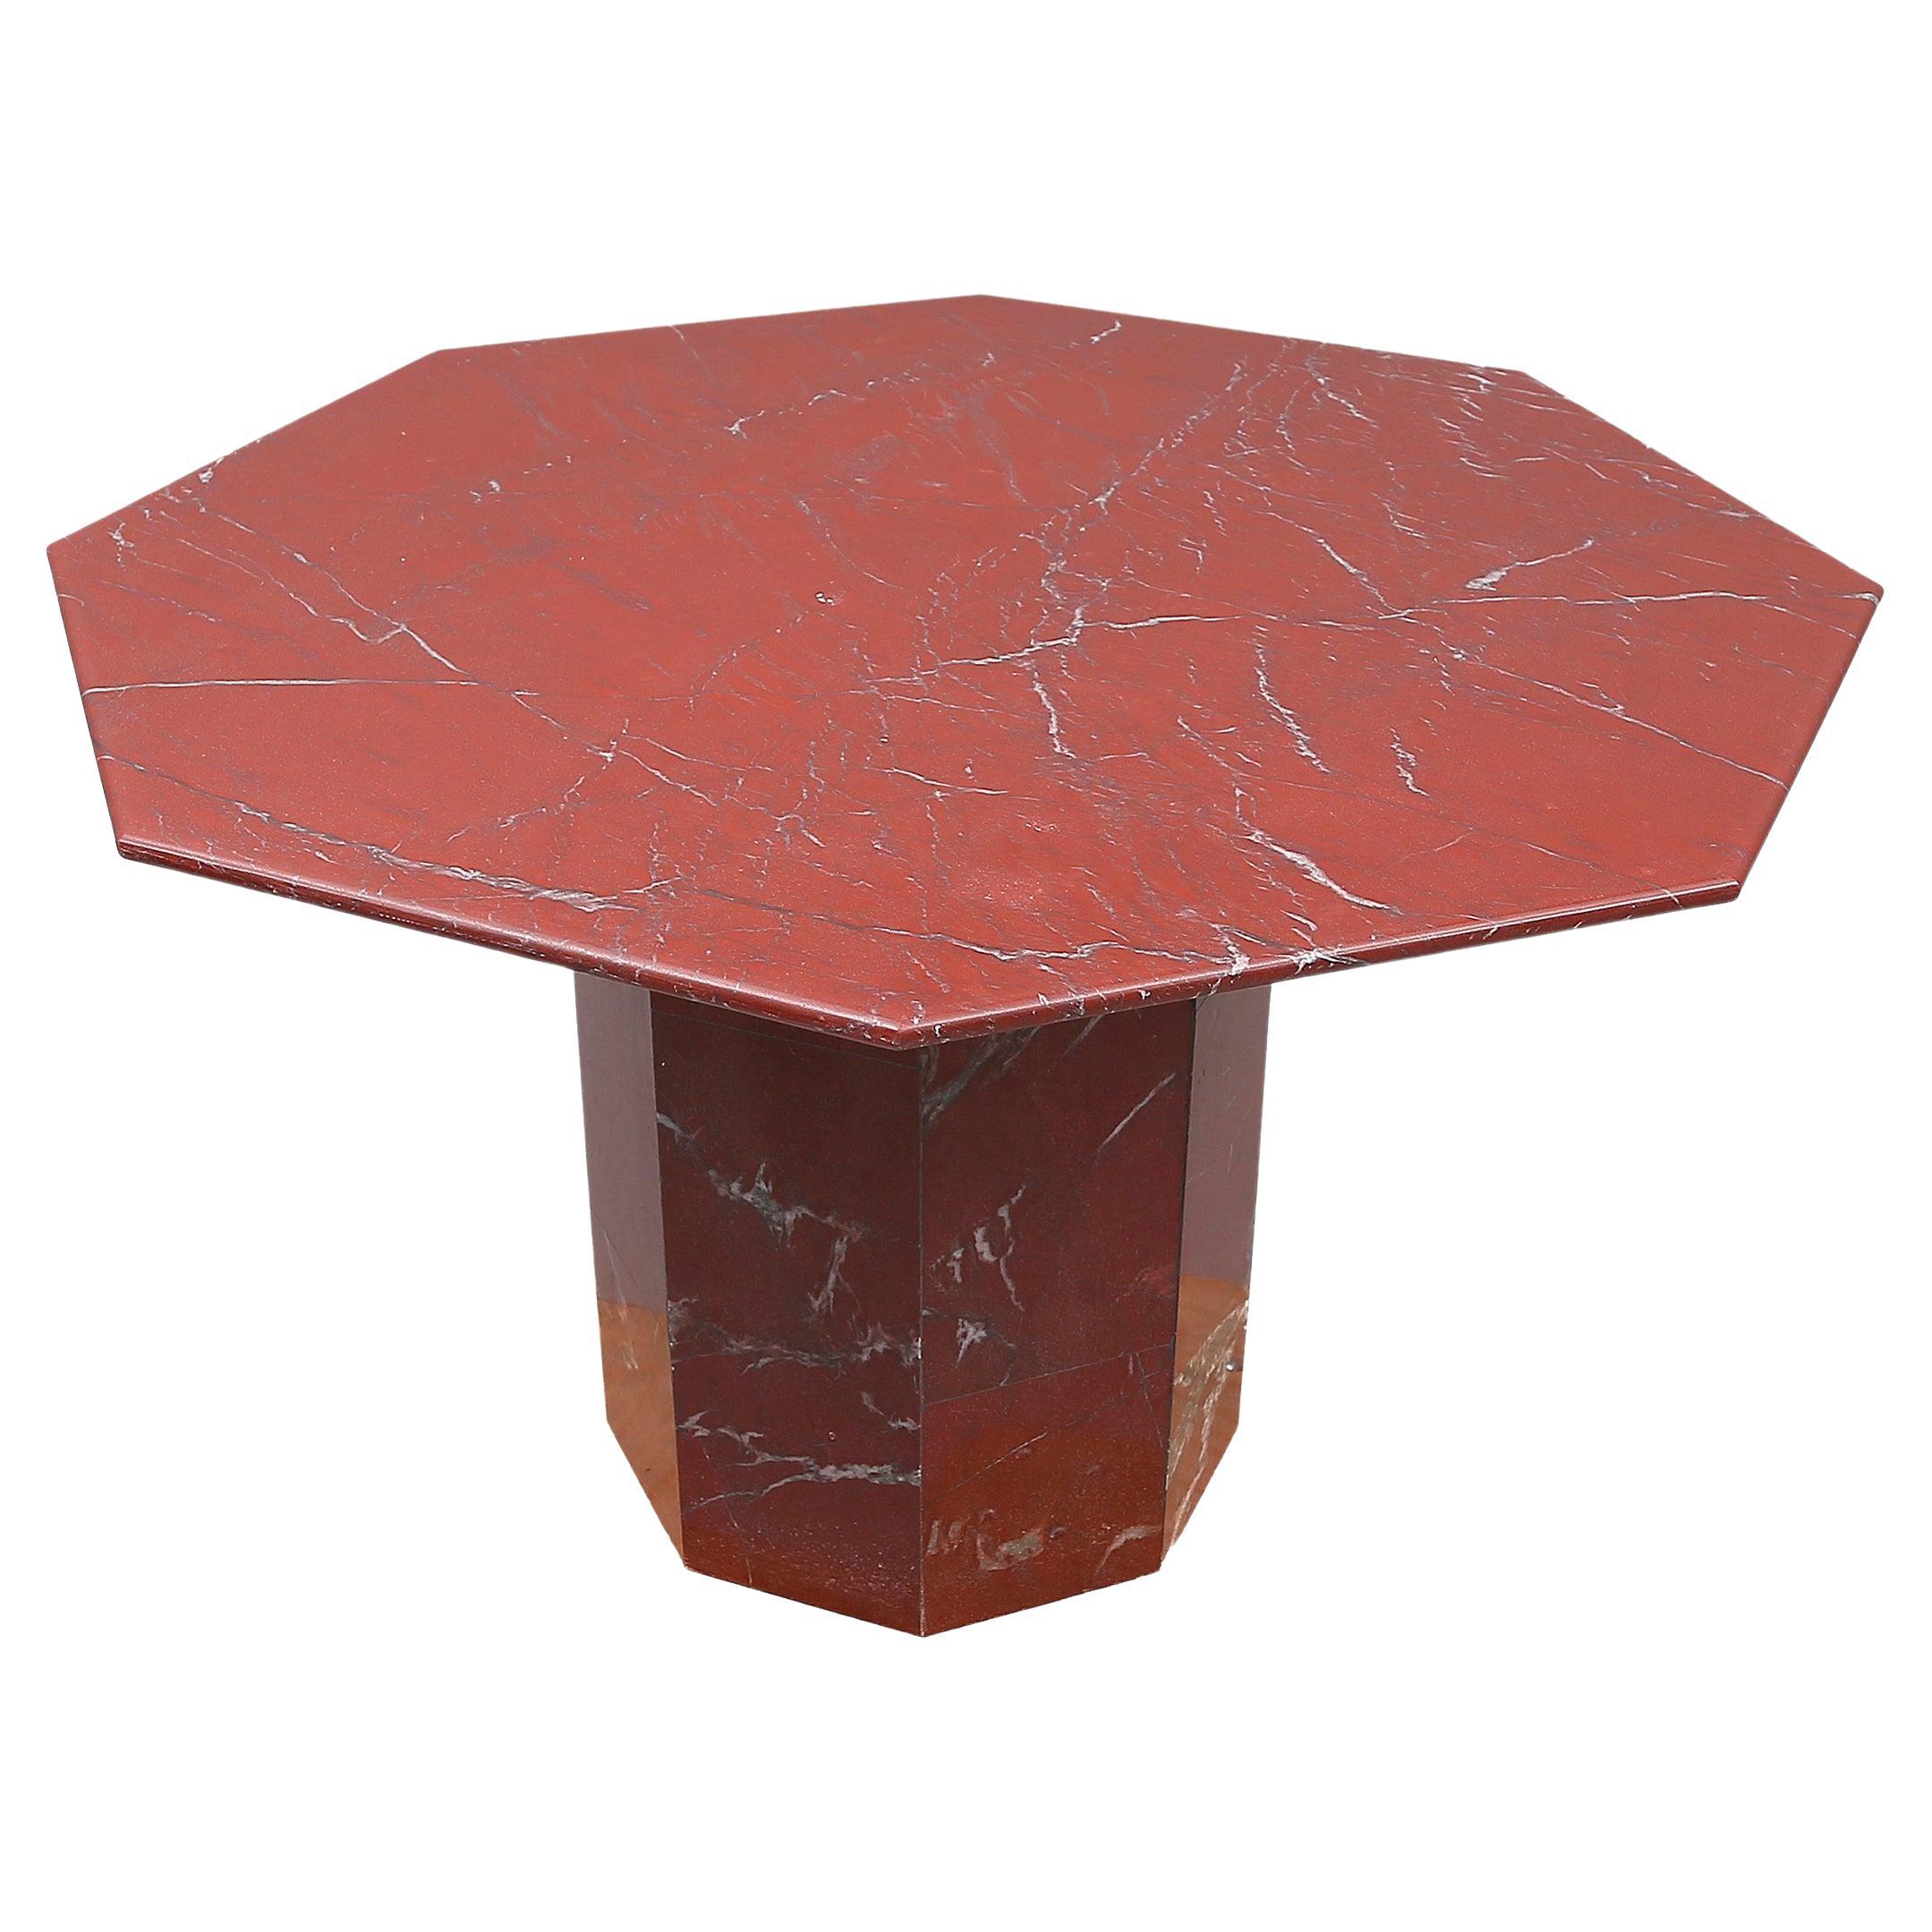 Italian Modern Sculptural Octagonal Shaped Dining Table in Marble, Made in 1970s For Sale